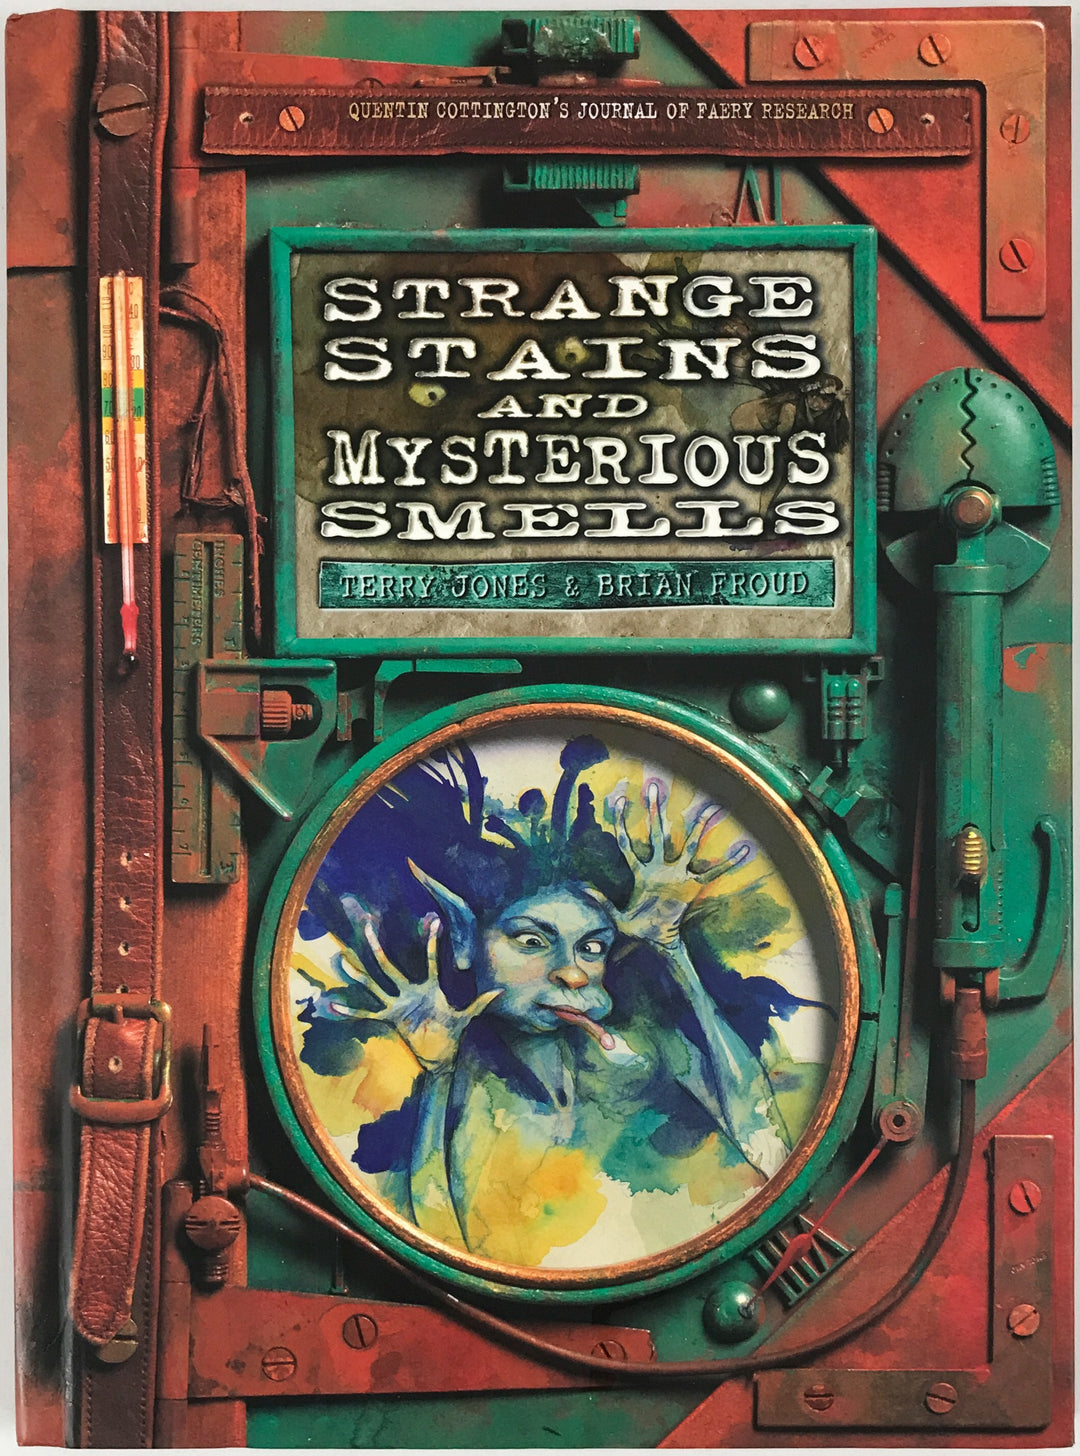 Strange Stains and Mysterious Smells - Signed Bookplate